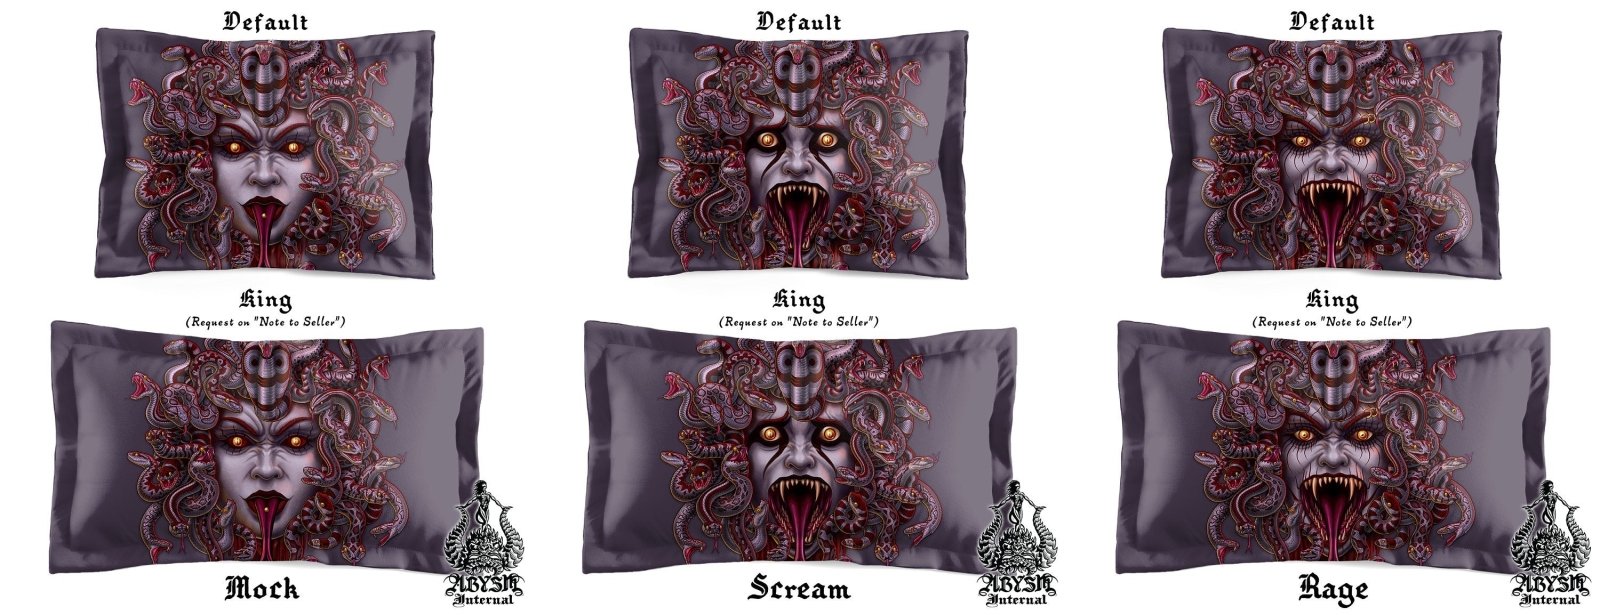 Bloody Bedding Set, Comforter and Duvet, Ash Medusa, Horror Bed Cover and Bedroom Decor, King, Queen and Twin Size - 3 Faces - Abysm Internal